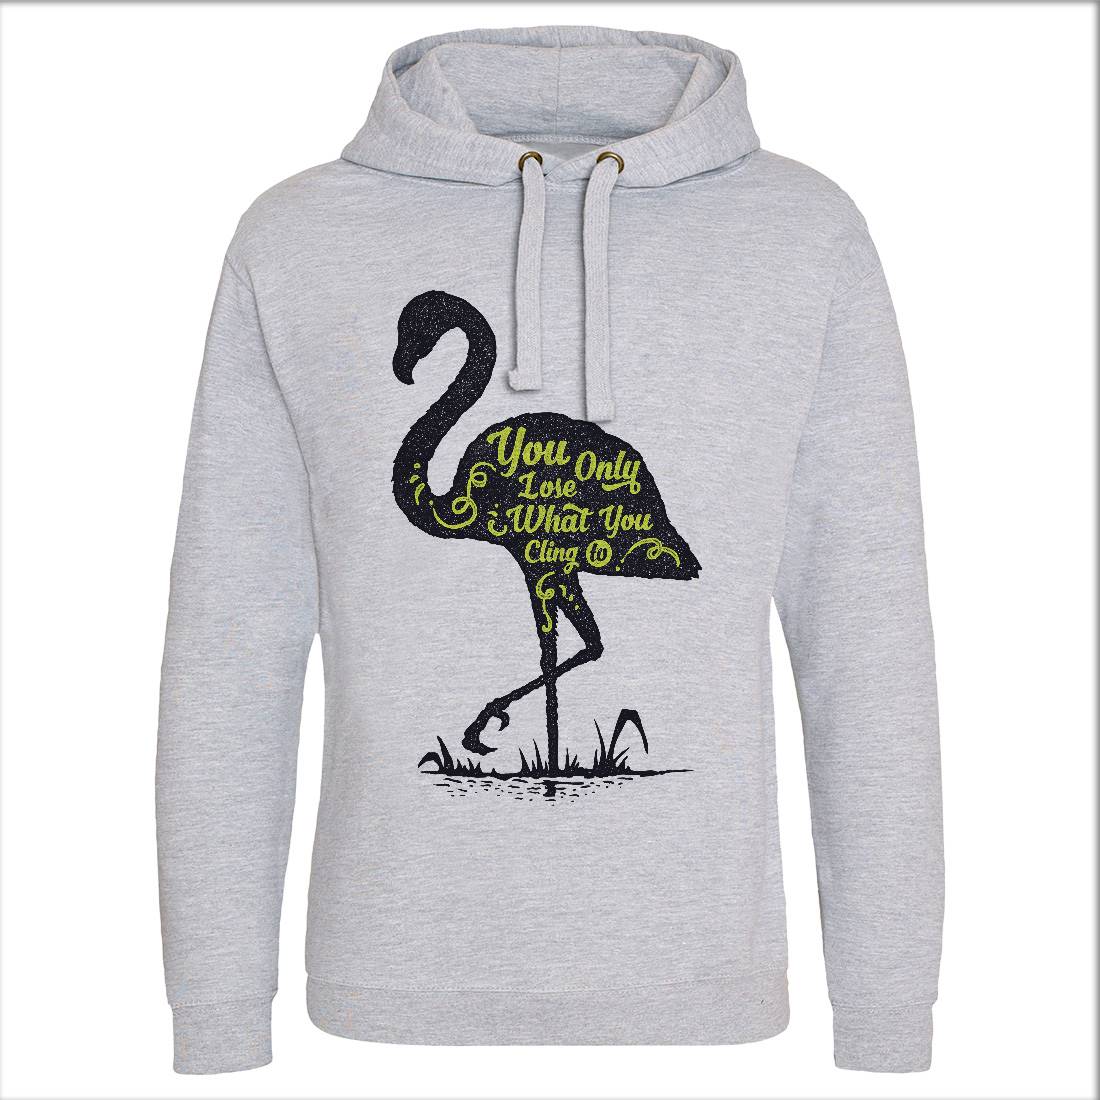 You Only Lose Mens Hoodie Without Pocket Quotes A395